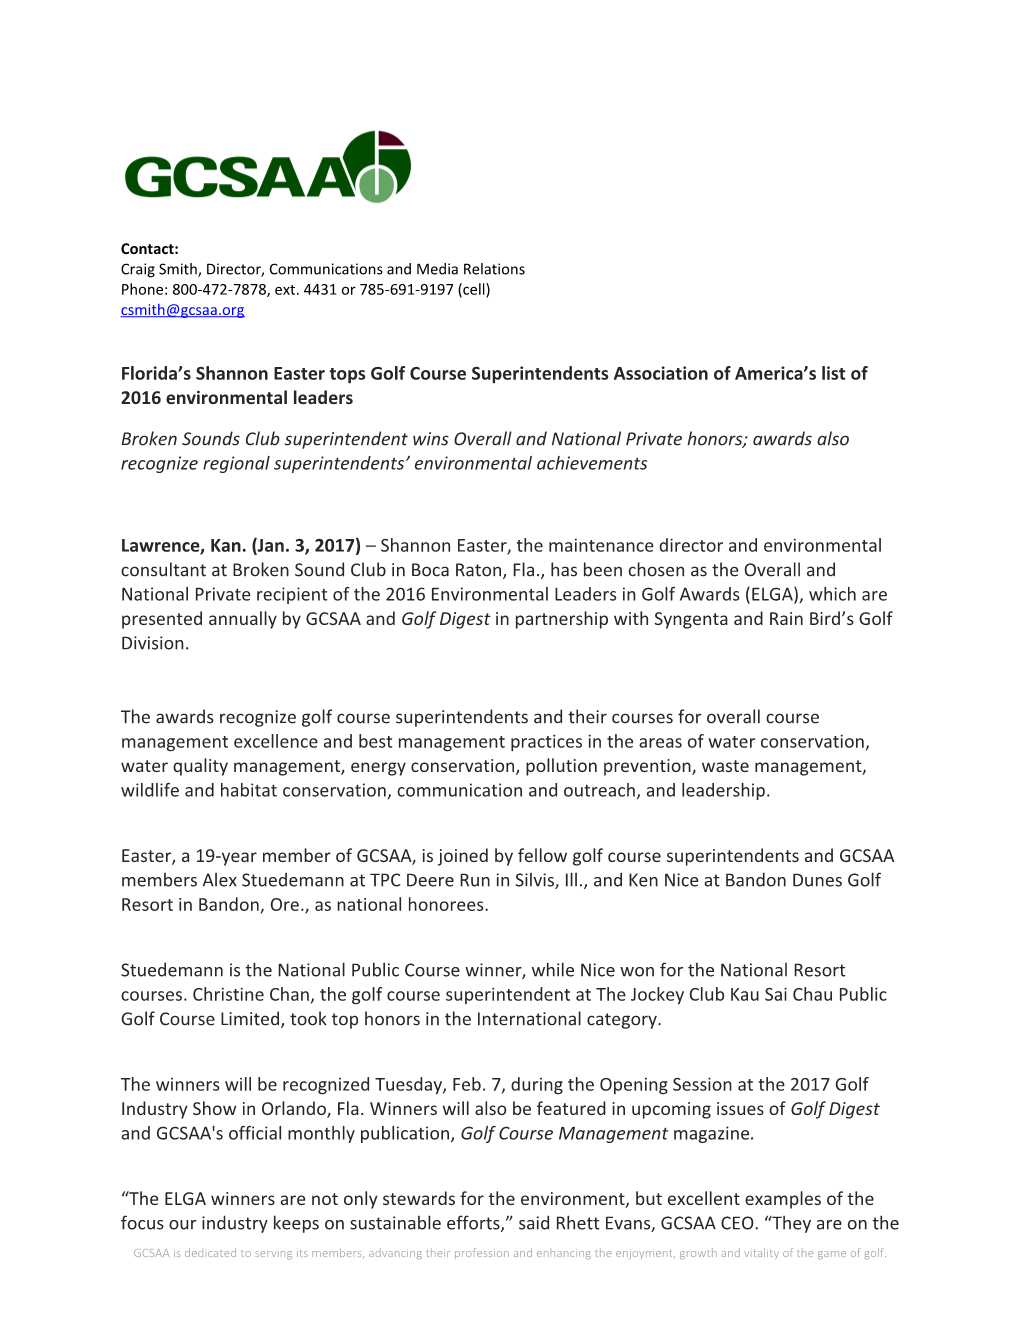 Florida S Shannon Easter Tops Golf Course Superintendents Association of America S List